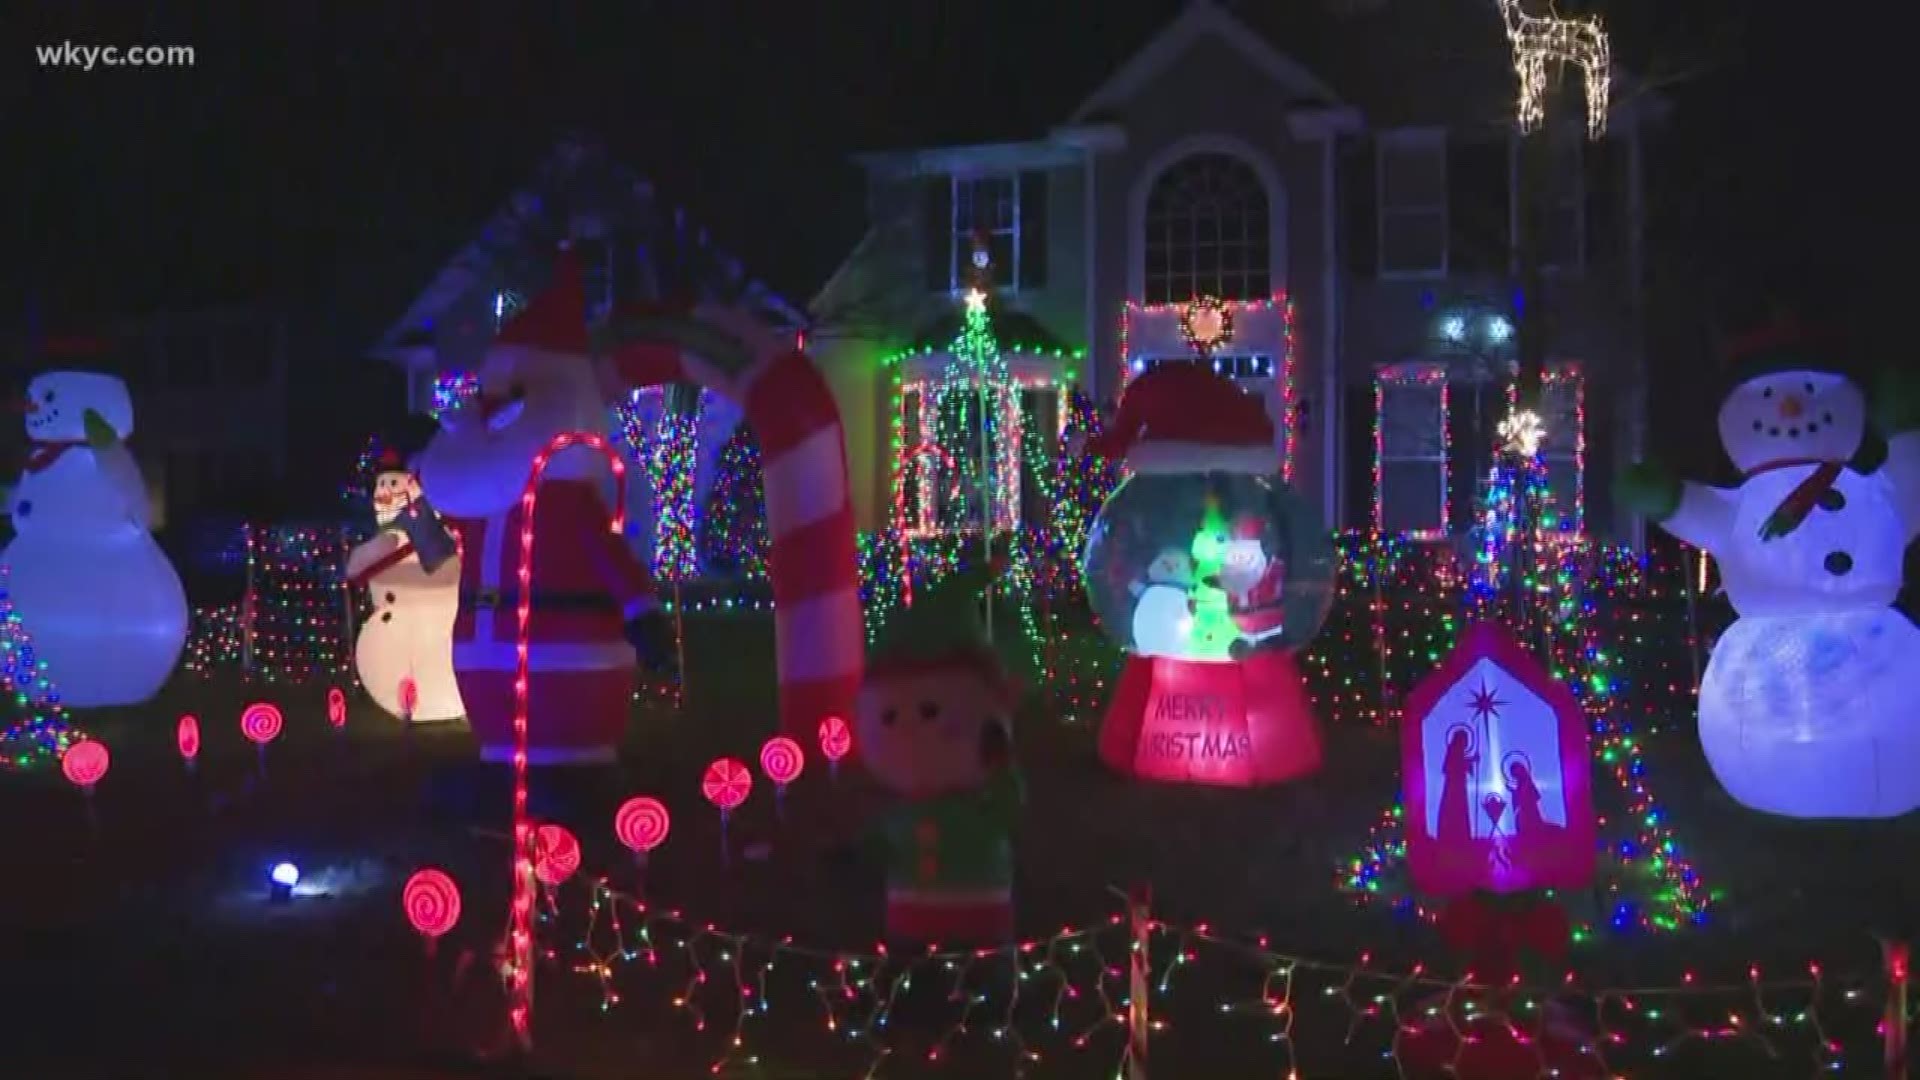 Wow! So awesome! 18-year-old Cameron Wittschen has been decorating his home since he was 14. You can see these decorations at 3389 Spruce Court in Avon, Ohio.